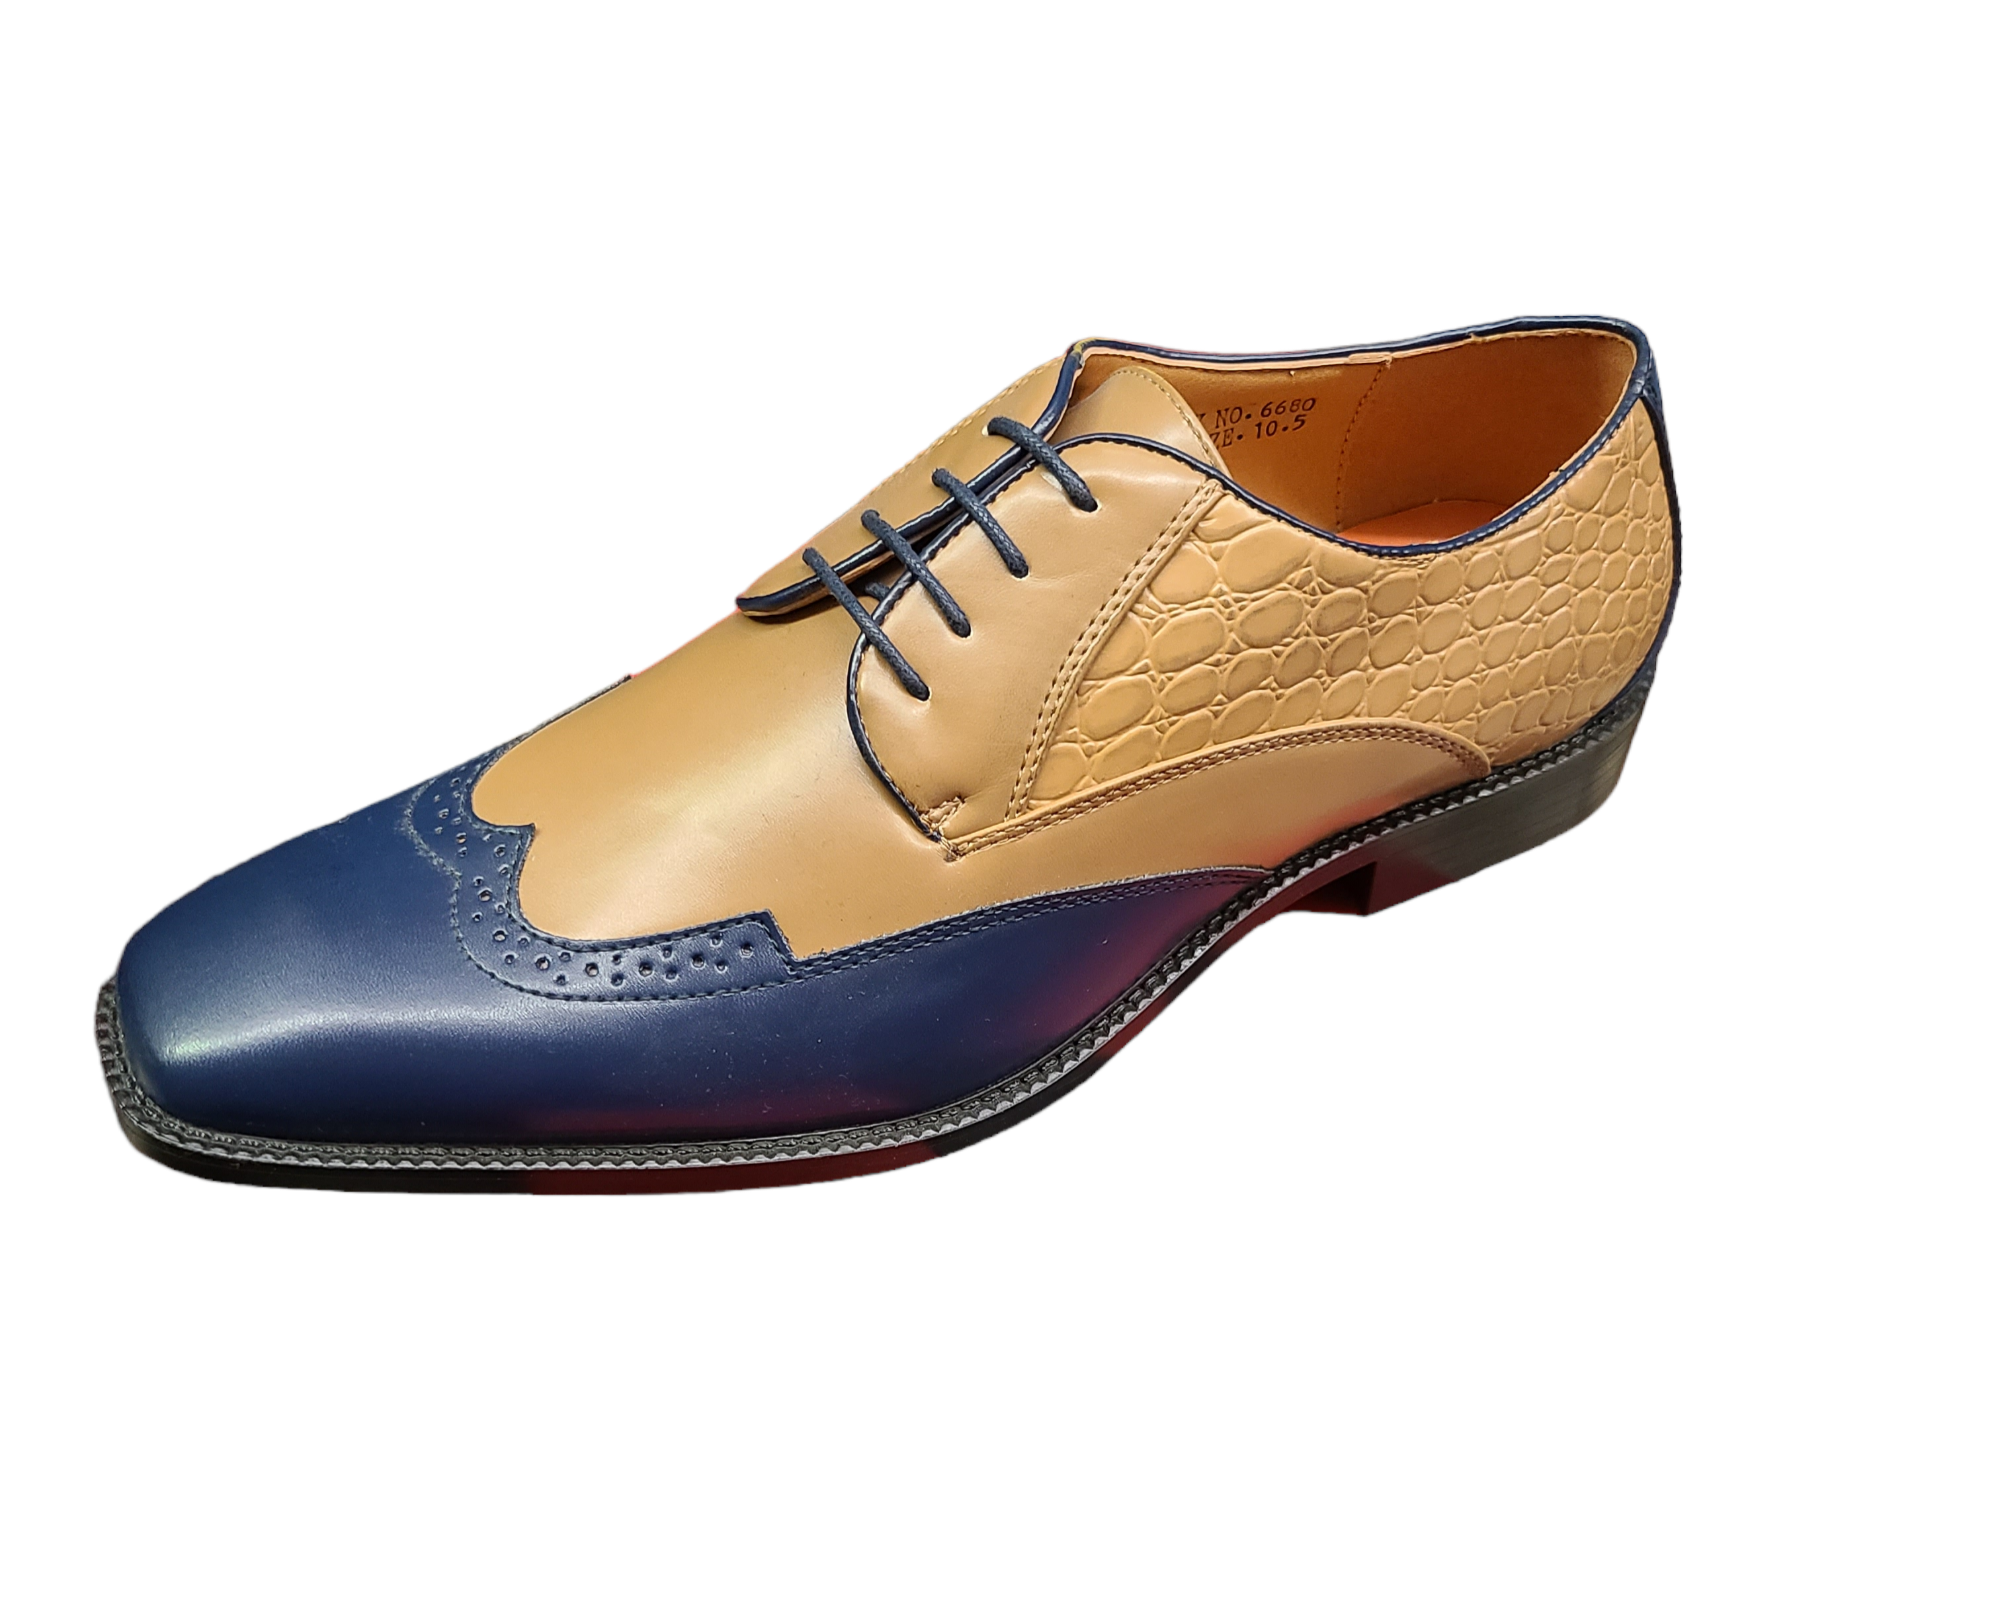 Antonio Cerrelli Various Styles of Dress Shoes - Clearance